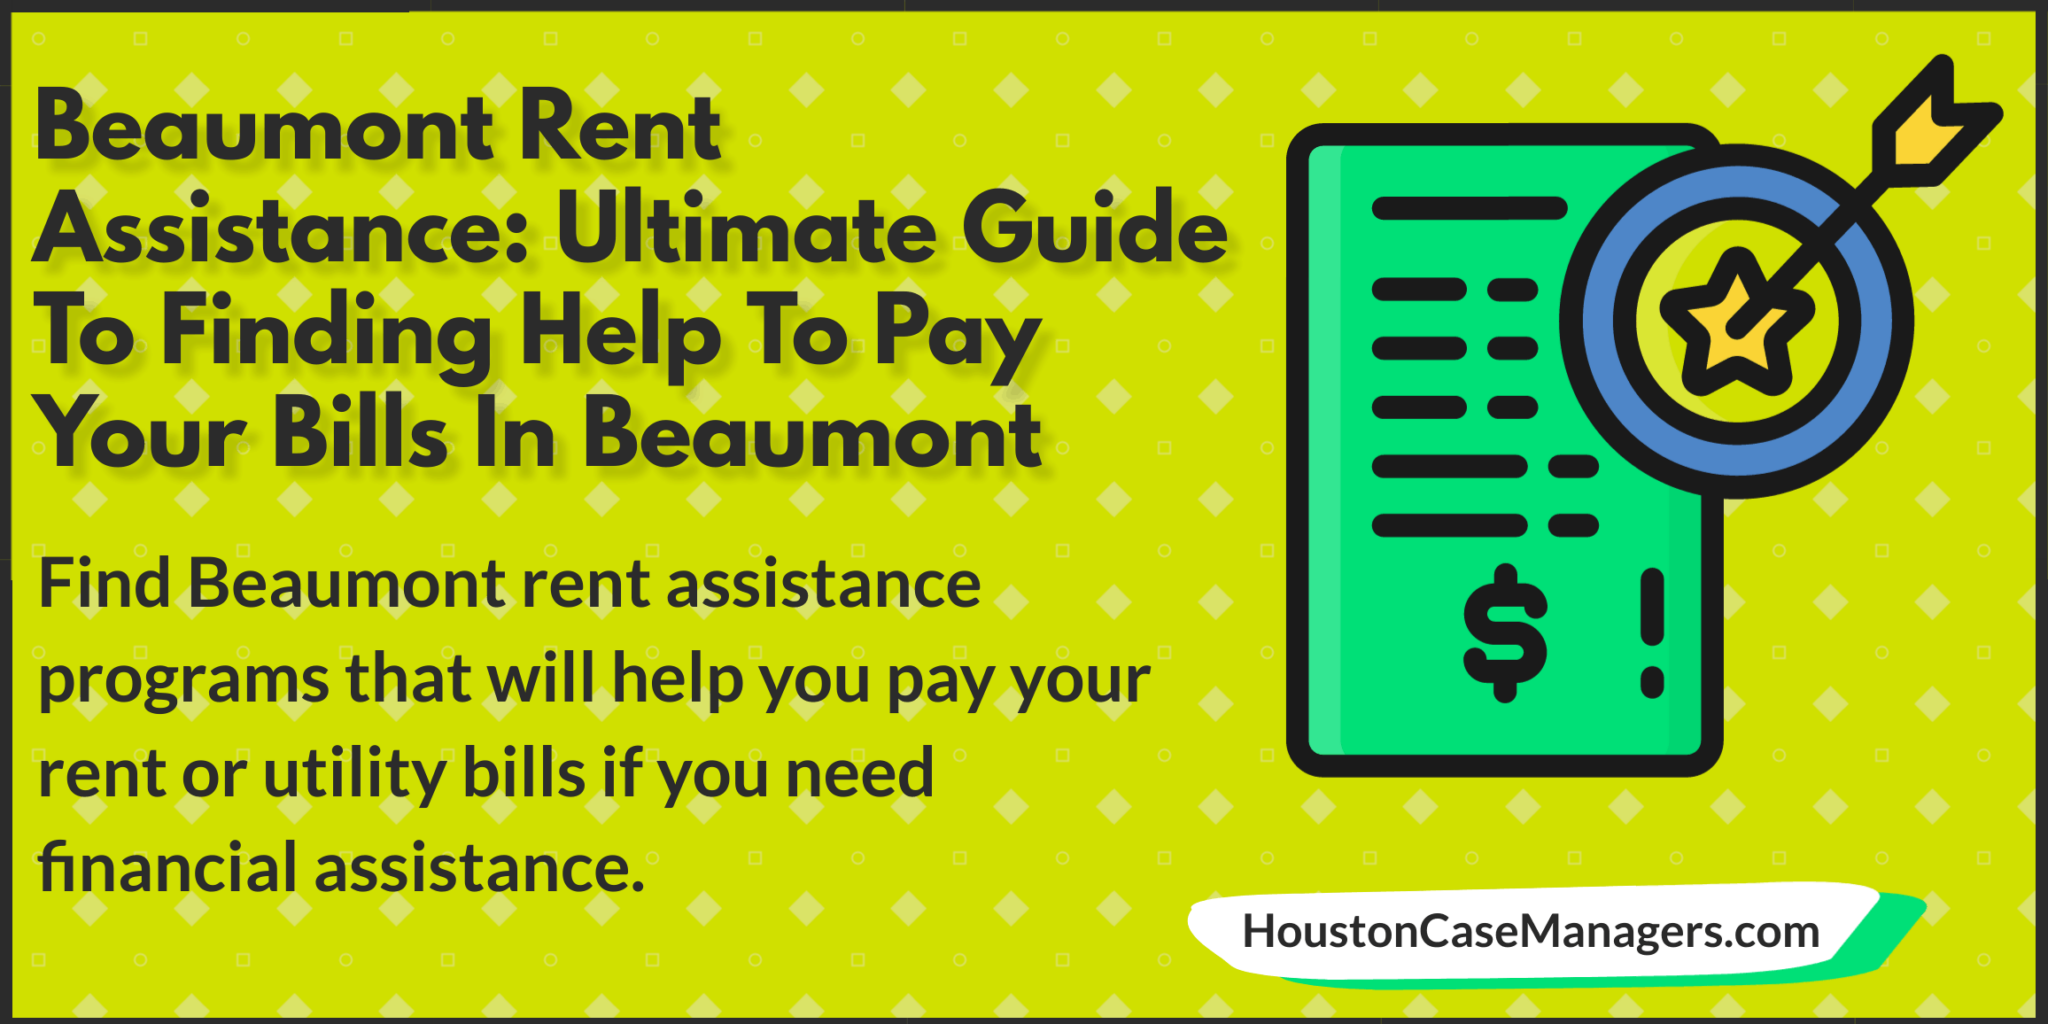 Beaumont Rent Assistance Find Help To Pay Your Bills In Beaumont